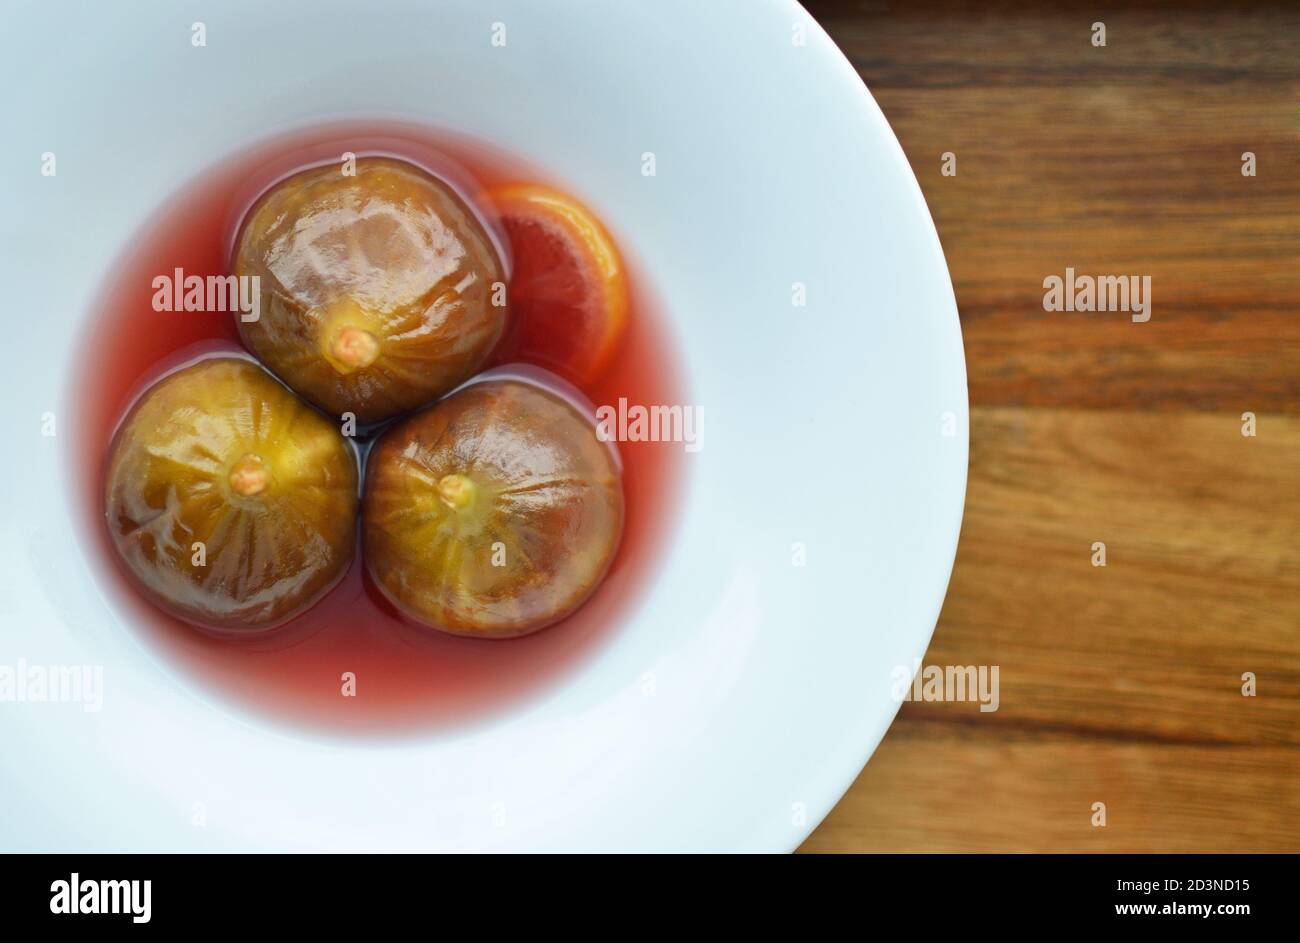 Top view shot of figs in syrup dessert Stock Photo